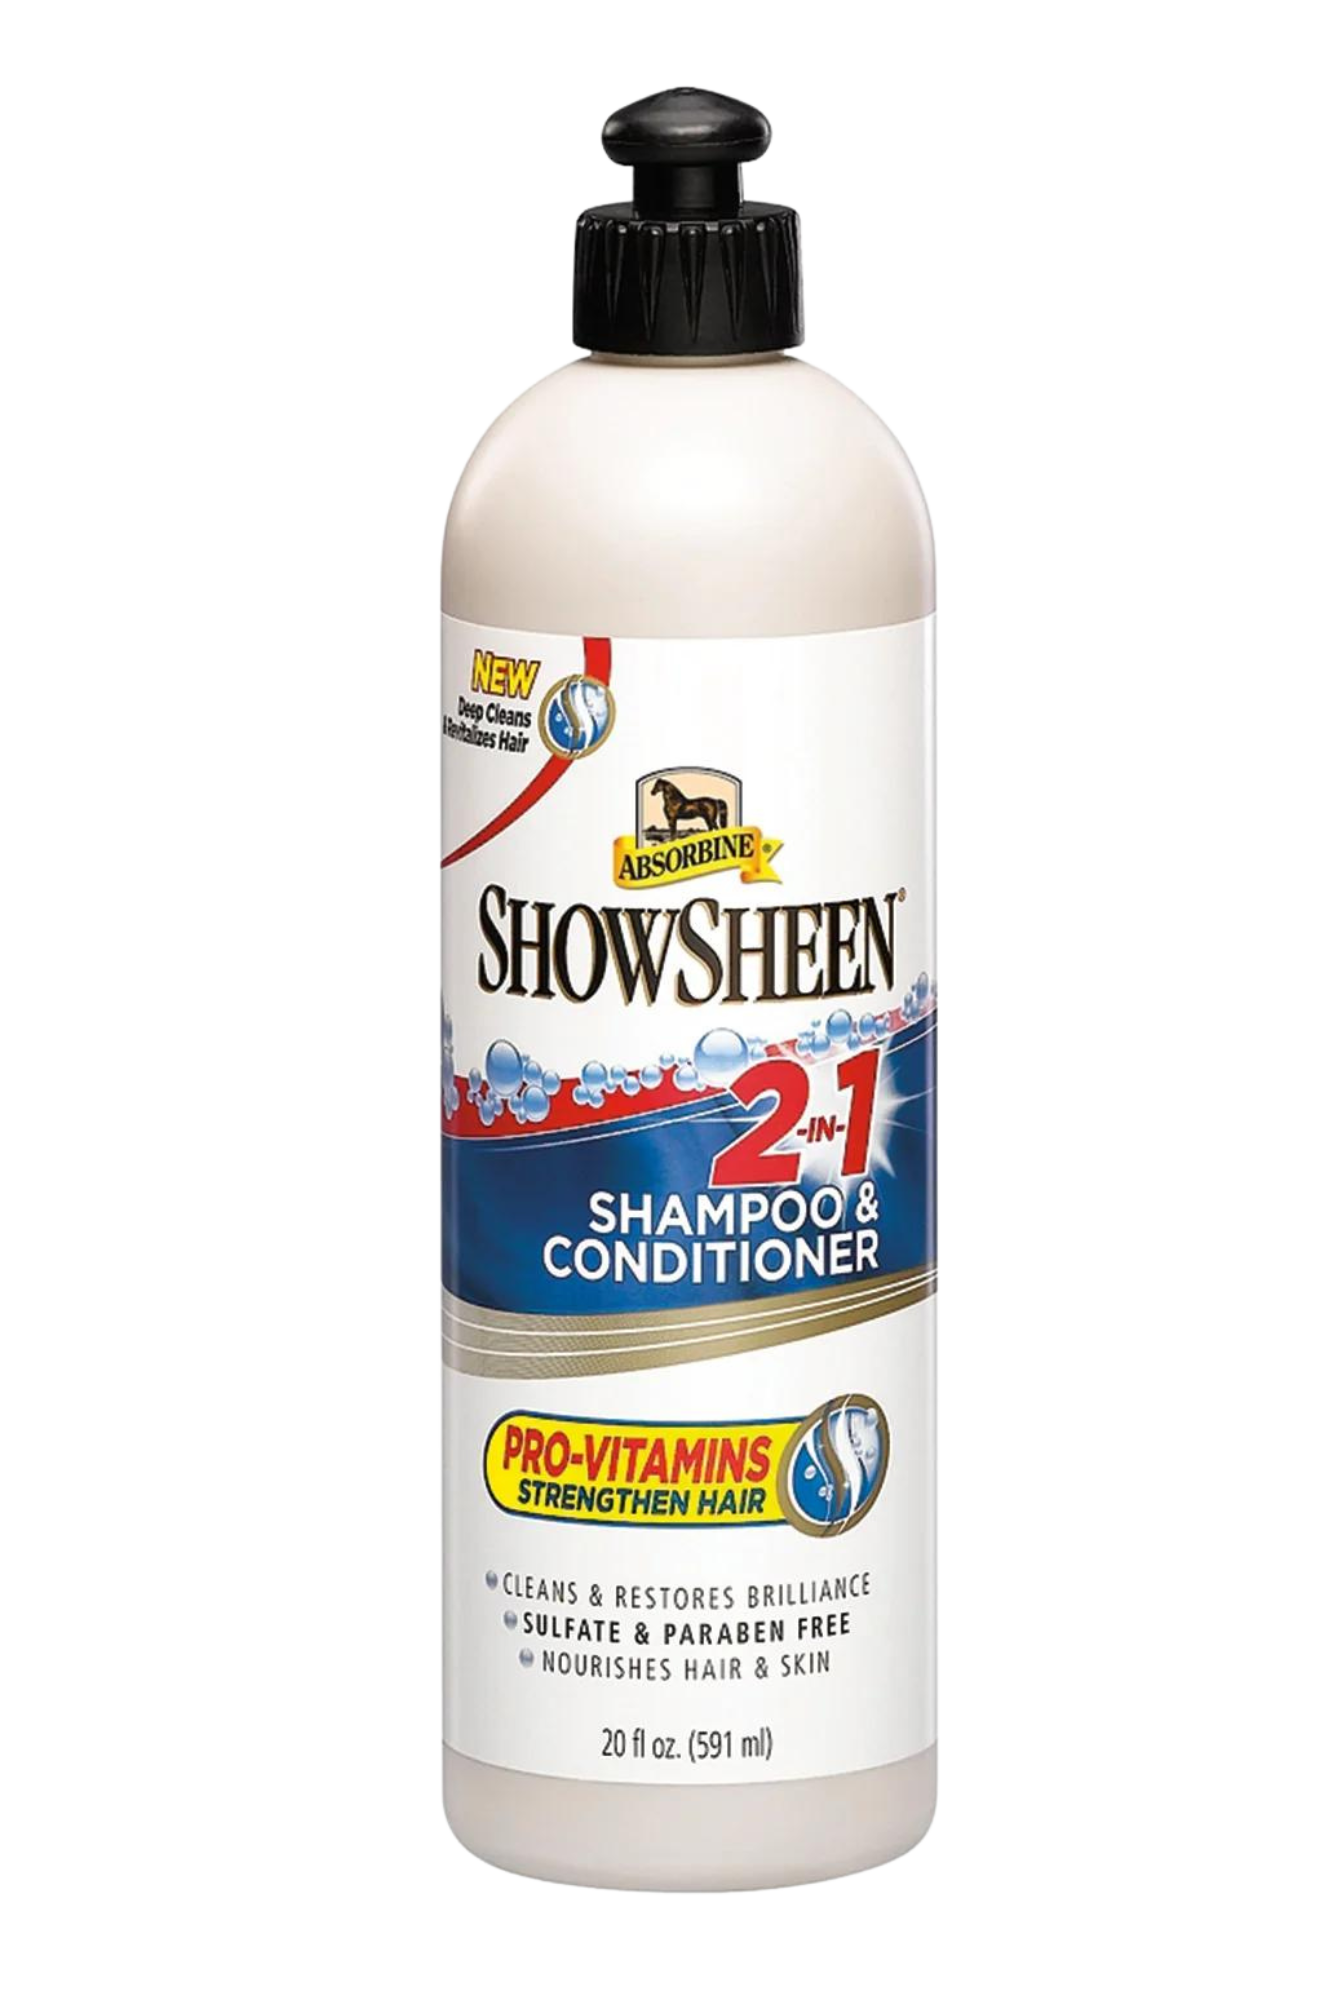 SHOWSHEEN 2 IN 1 SHAMPOO & CONDITIONER